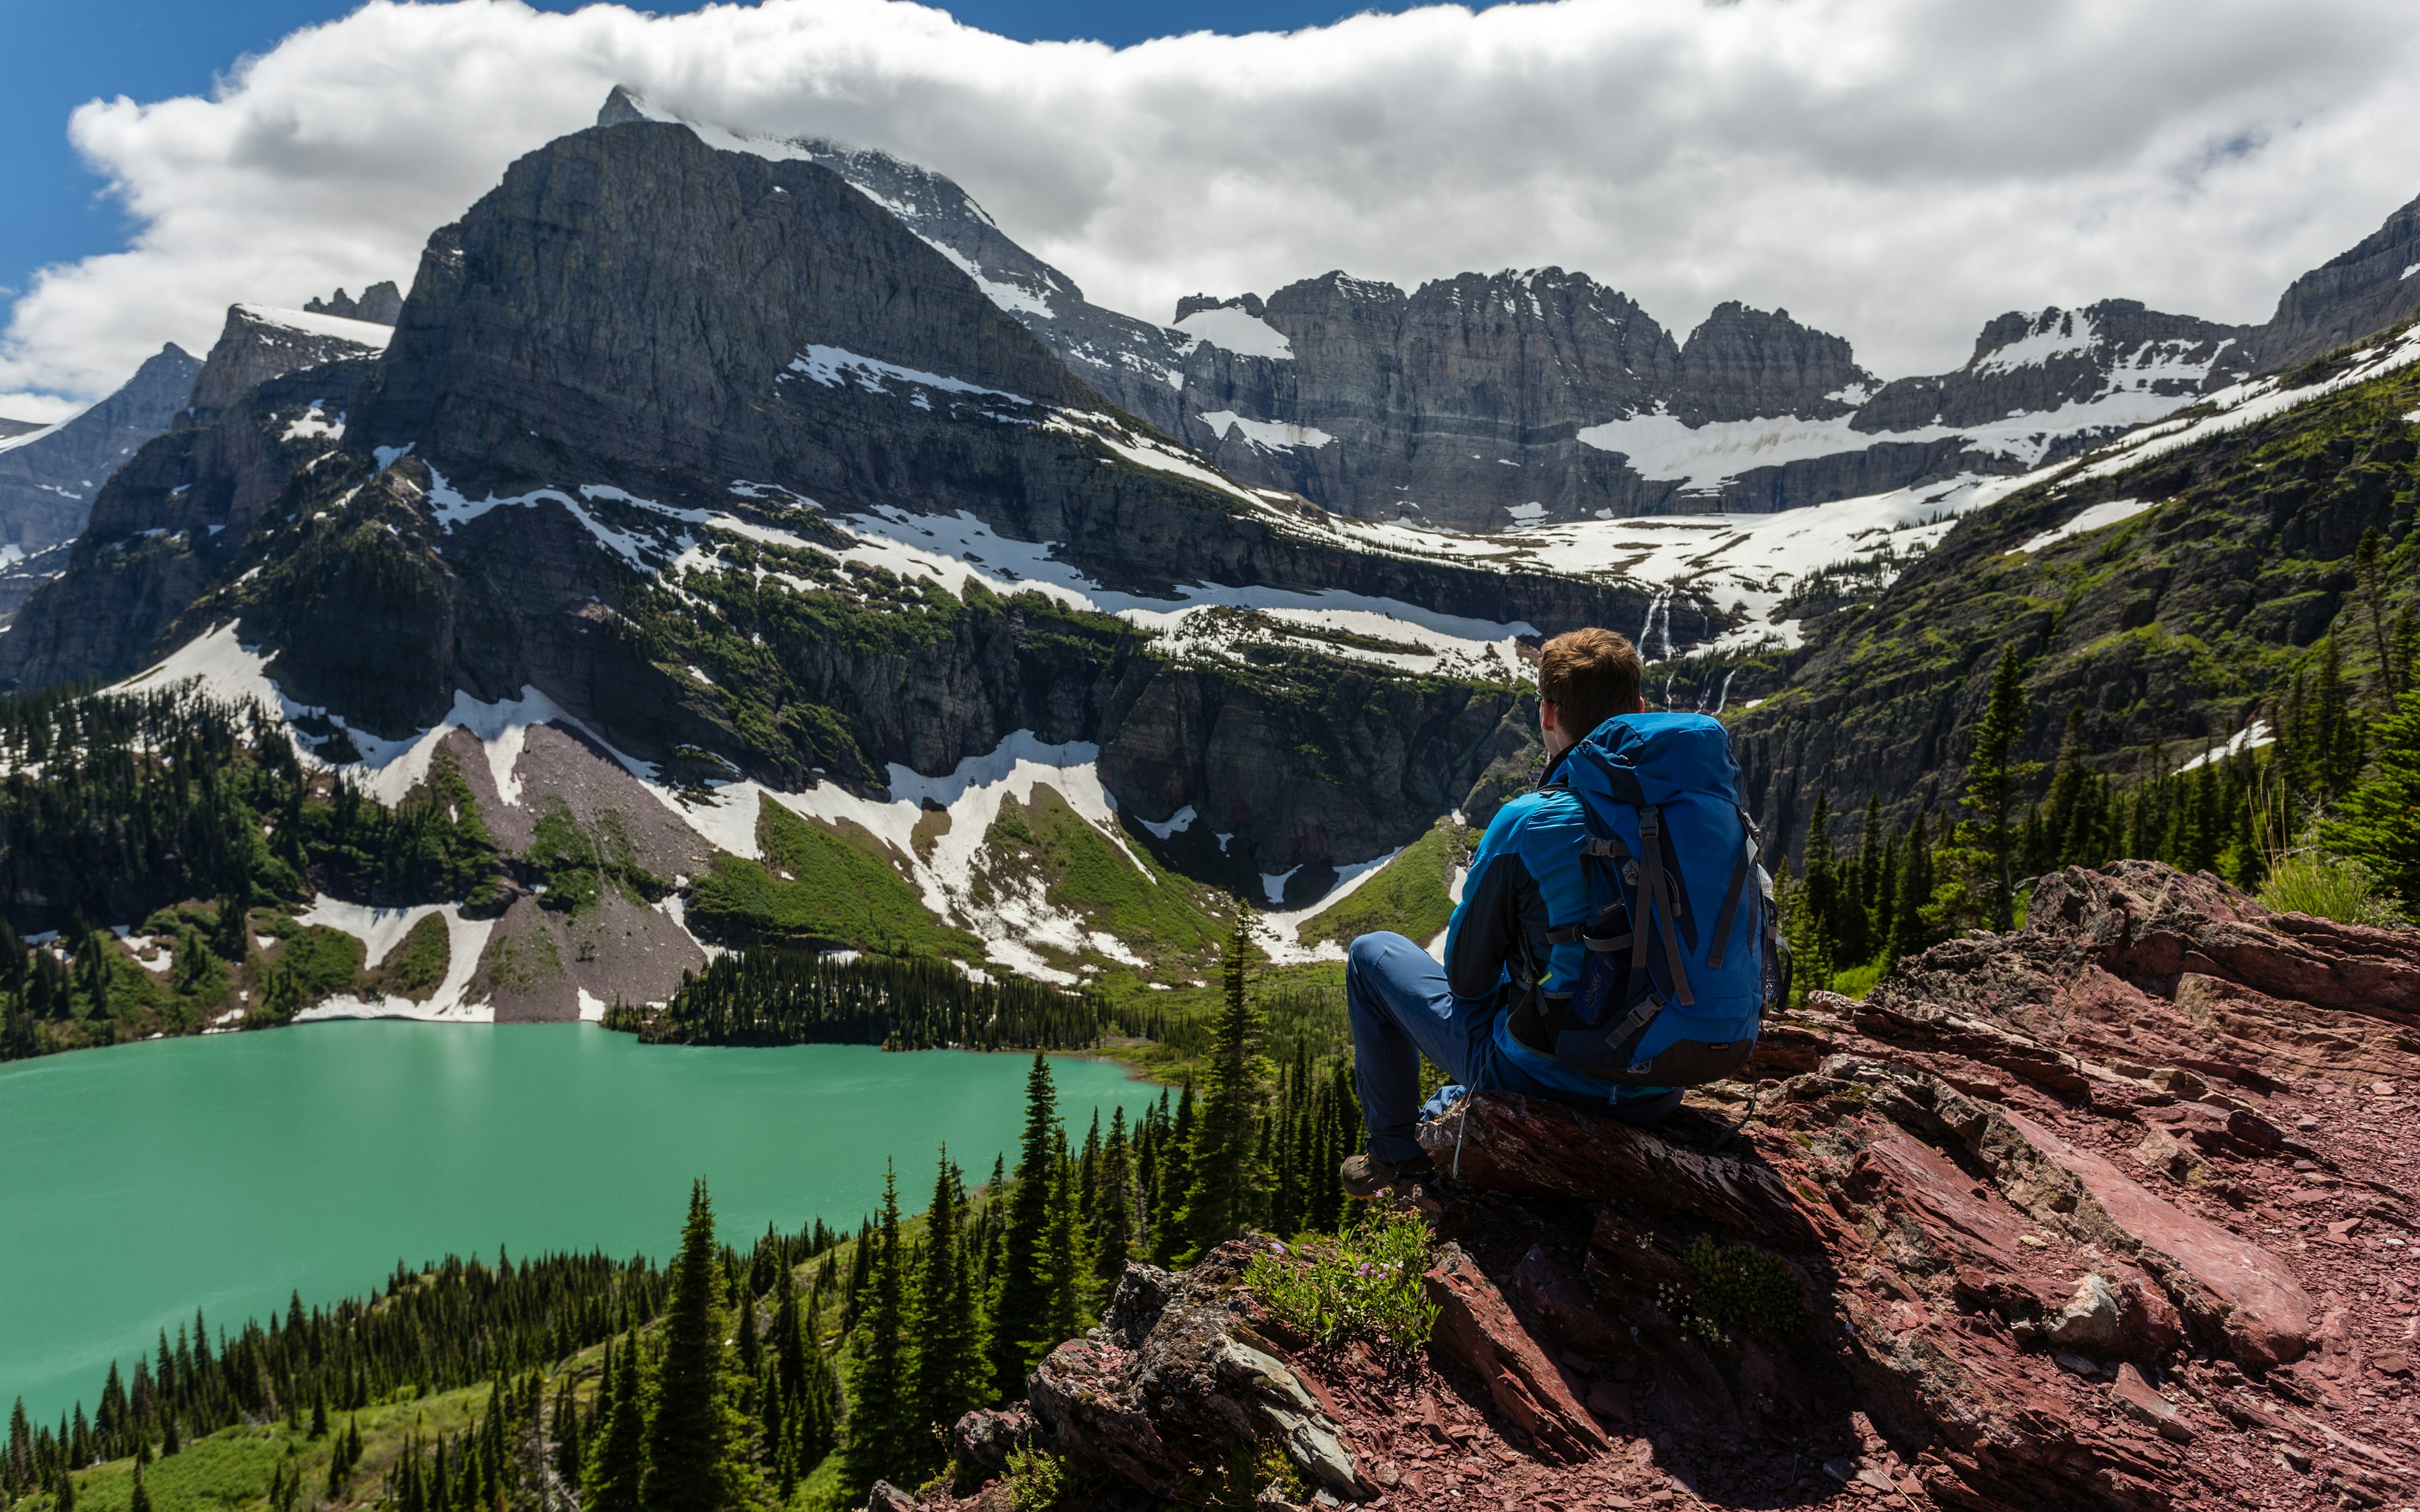 Hiker in Glacier National Park enjoying the view of Grinnell Lake